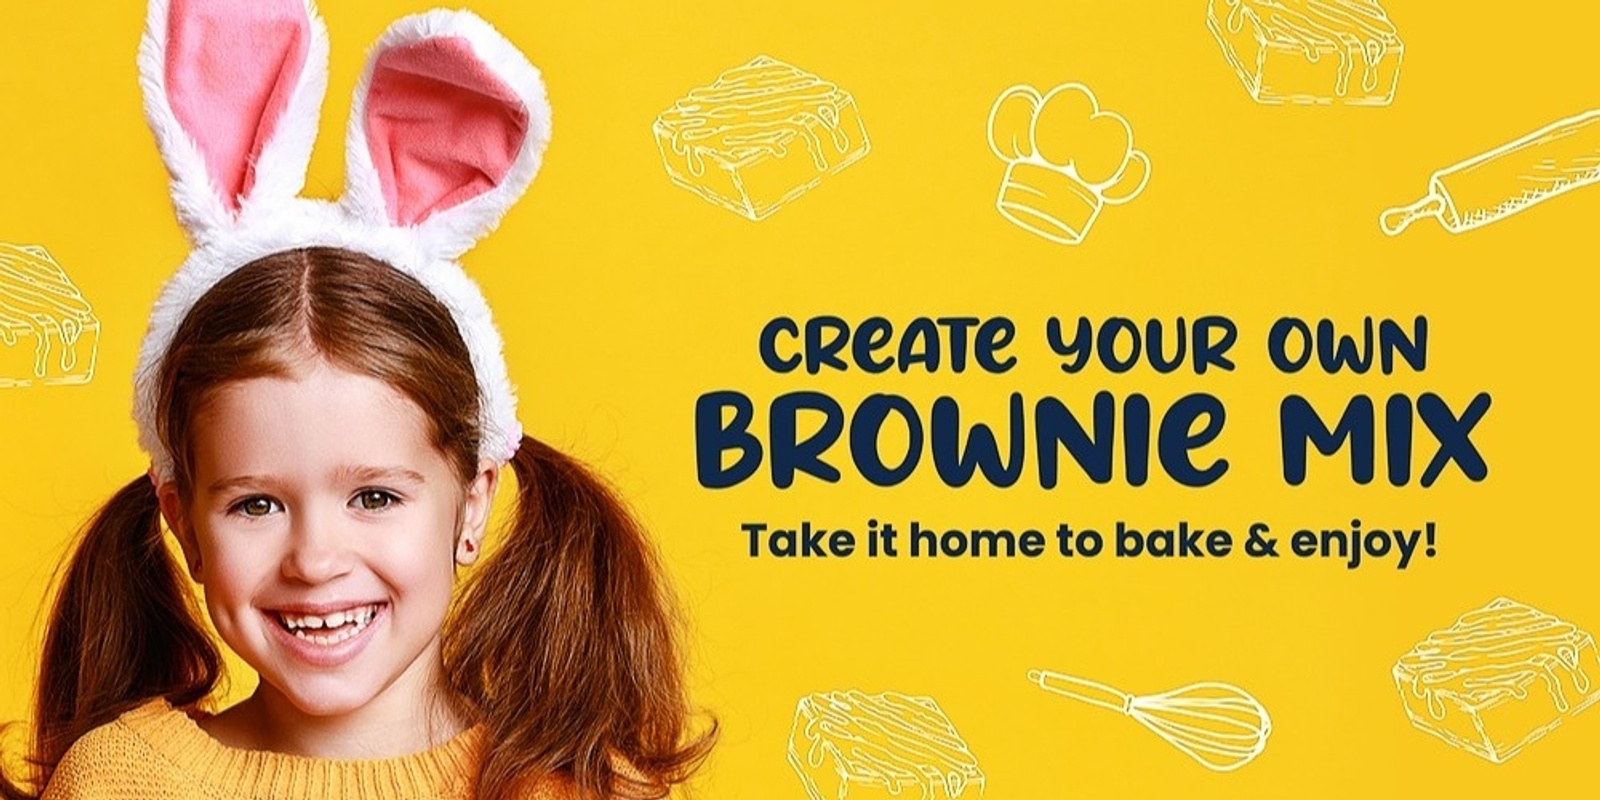 Create your own Brownie Mix this Easter